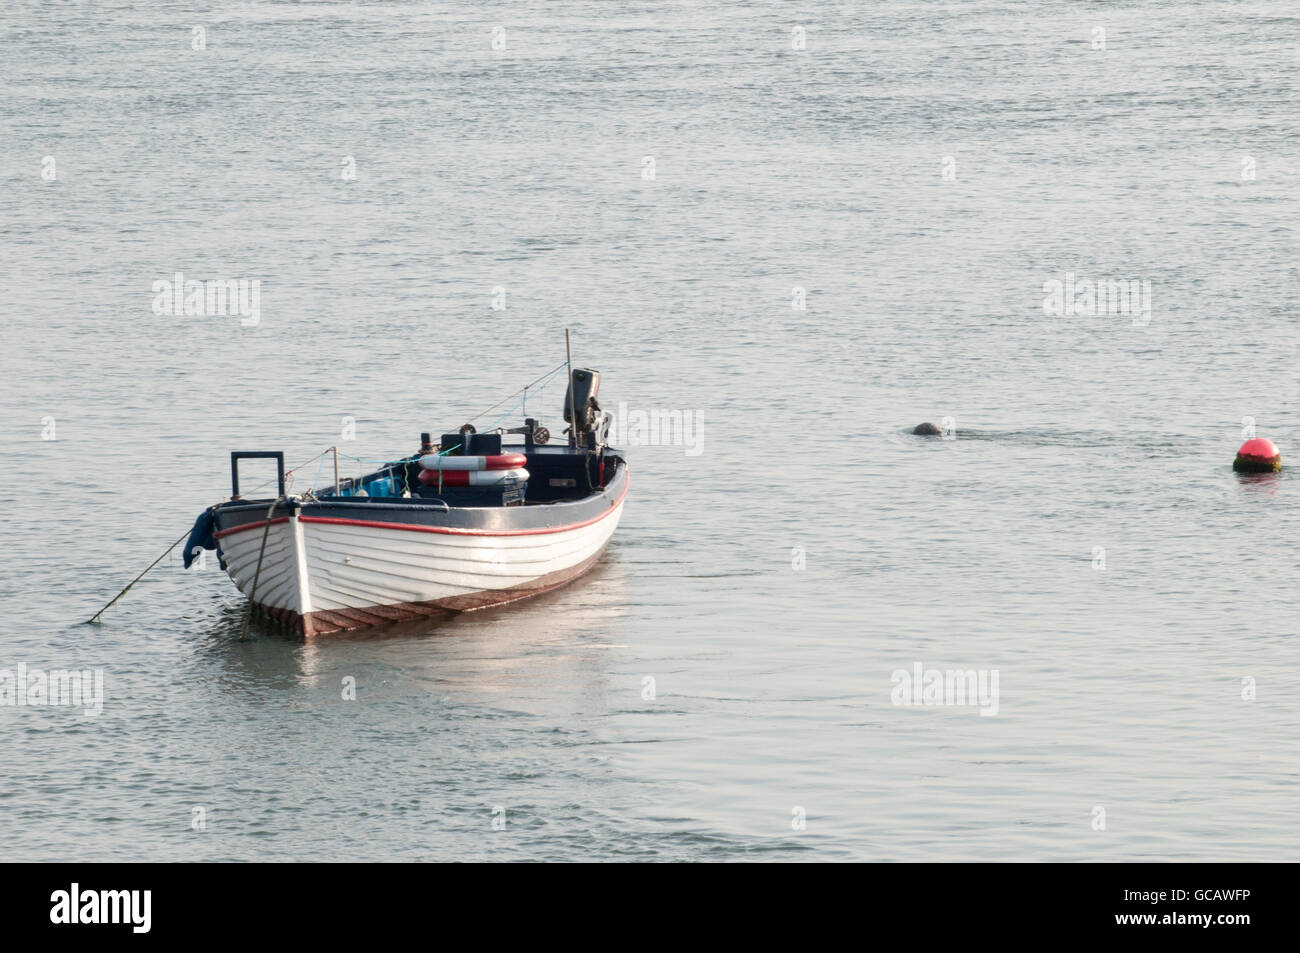 https://c8.alamy.com/comp/GCAWFP/small-fishing-boat-at-sunrise-moored-in-the-water-ready-for-sailing-GCAWFP.jpg